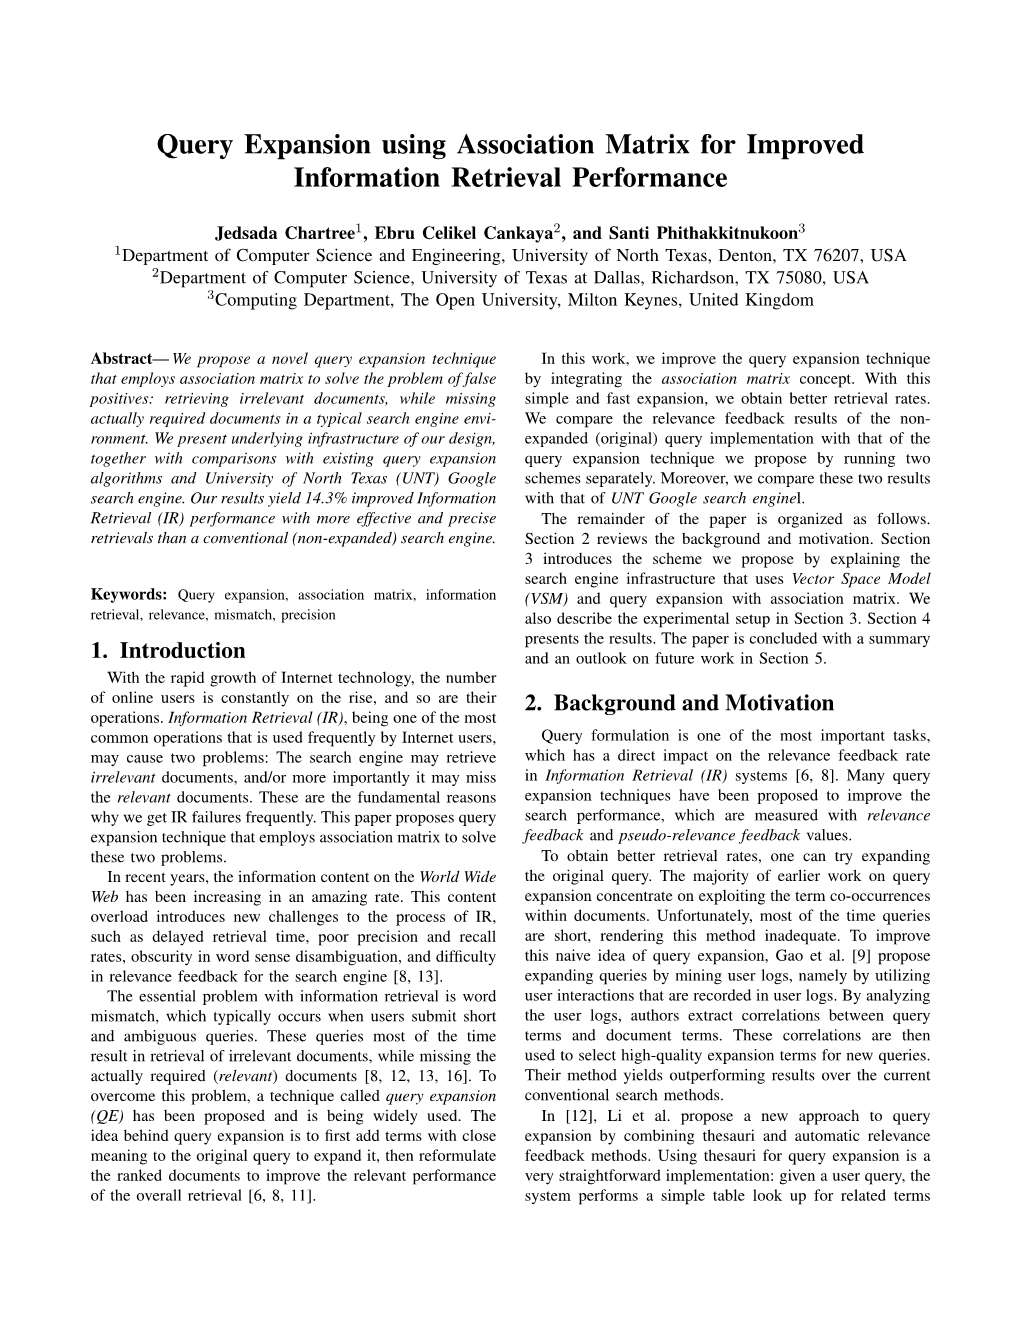 Query Expansion Using Association Matrix for Improved Information Retrieval Performance